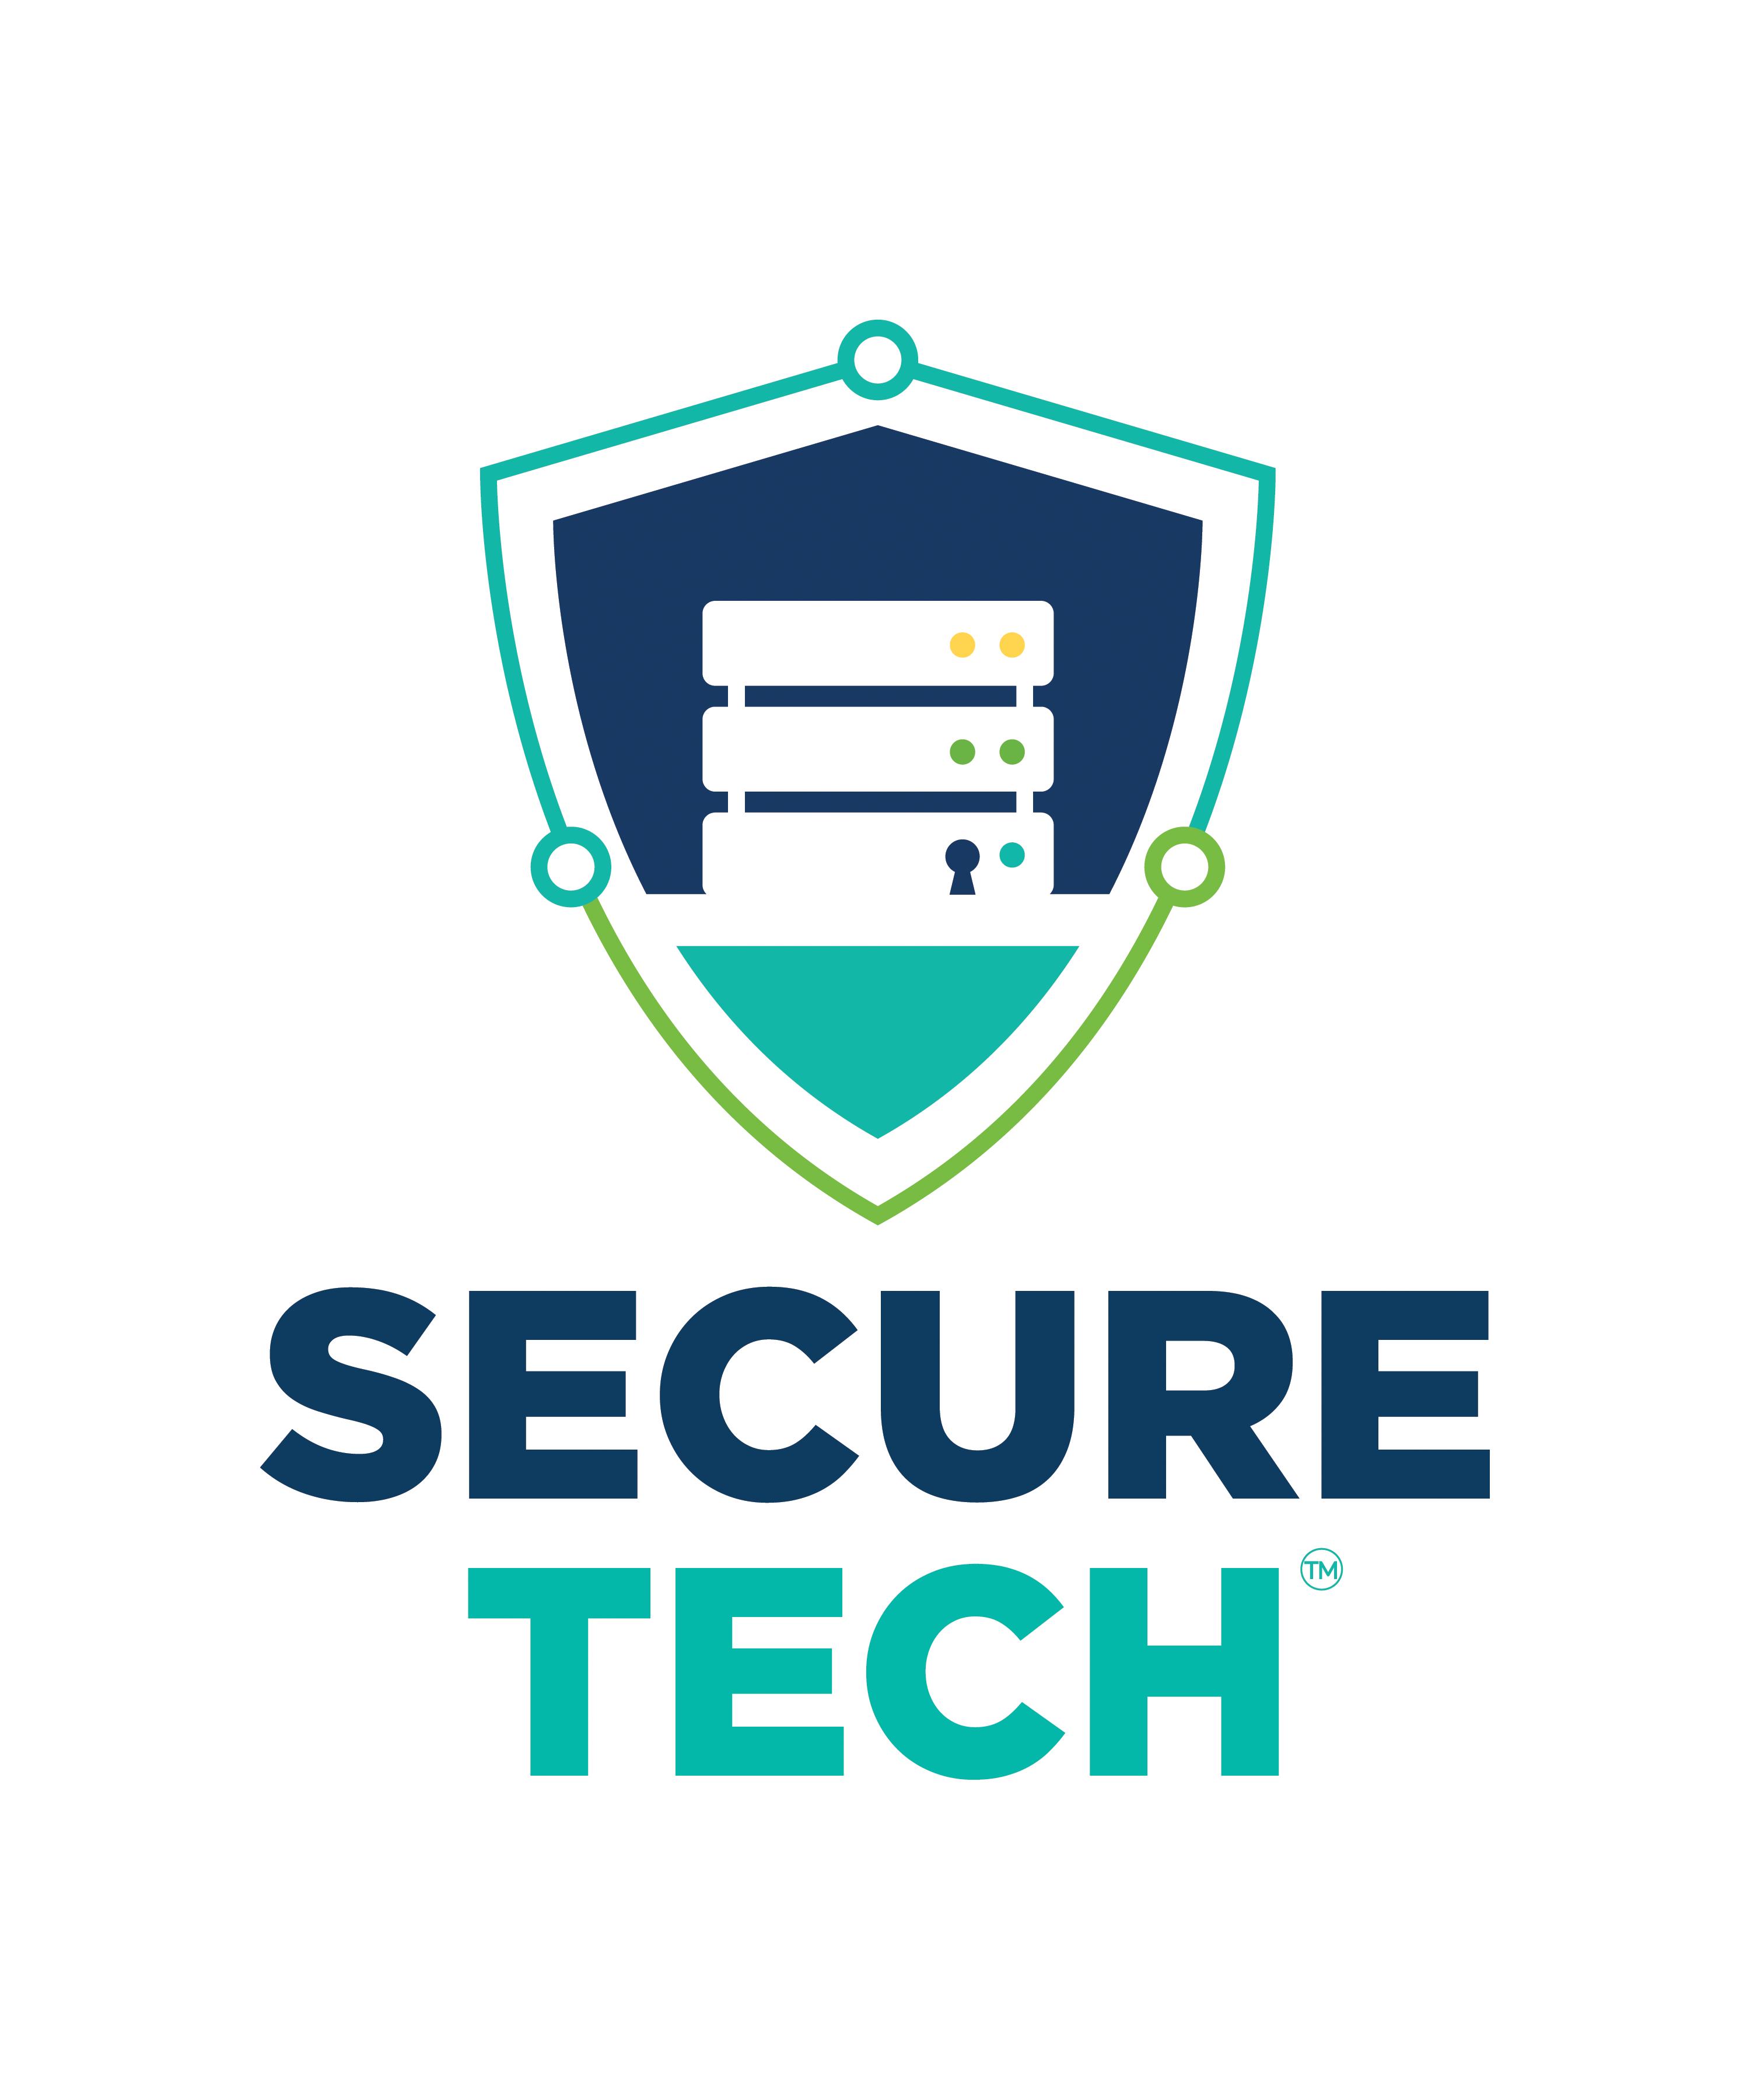 SecureTech profile on Qualified.One